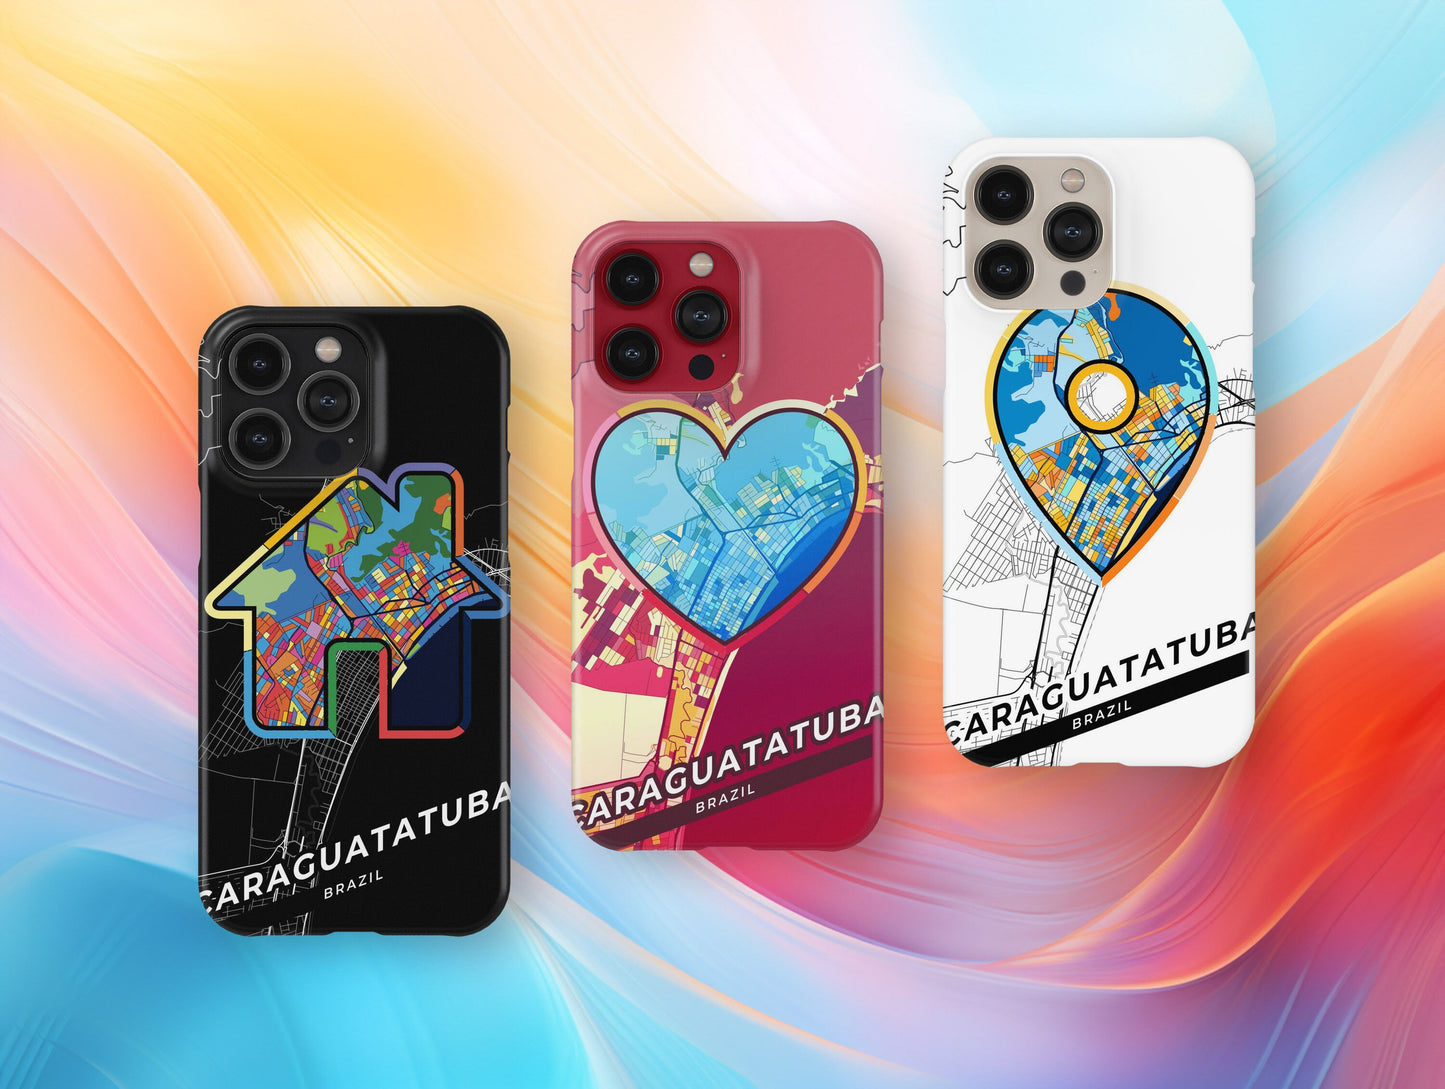 Caraguatatuba Brazil slim phone case with colorful icon. Birthday, wedding or housewarming gift. Couple match cases.